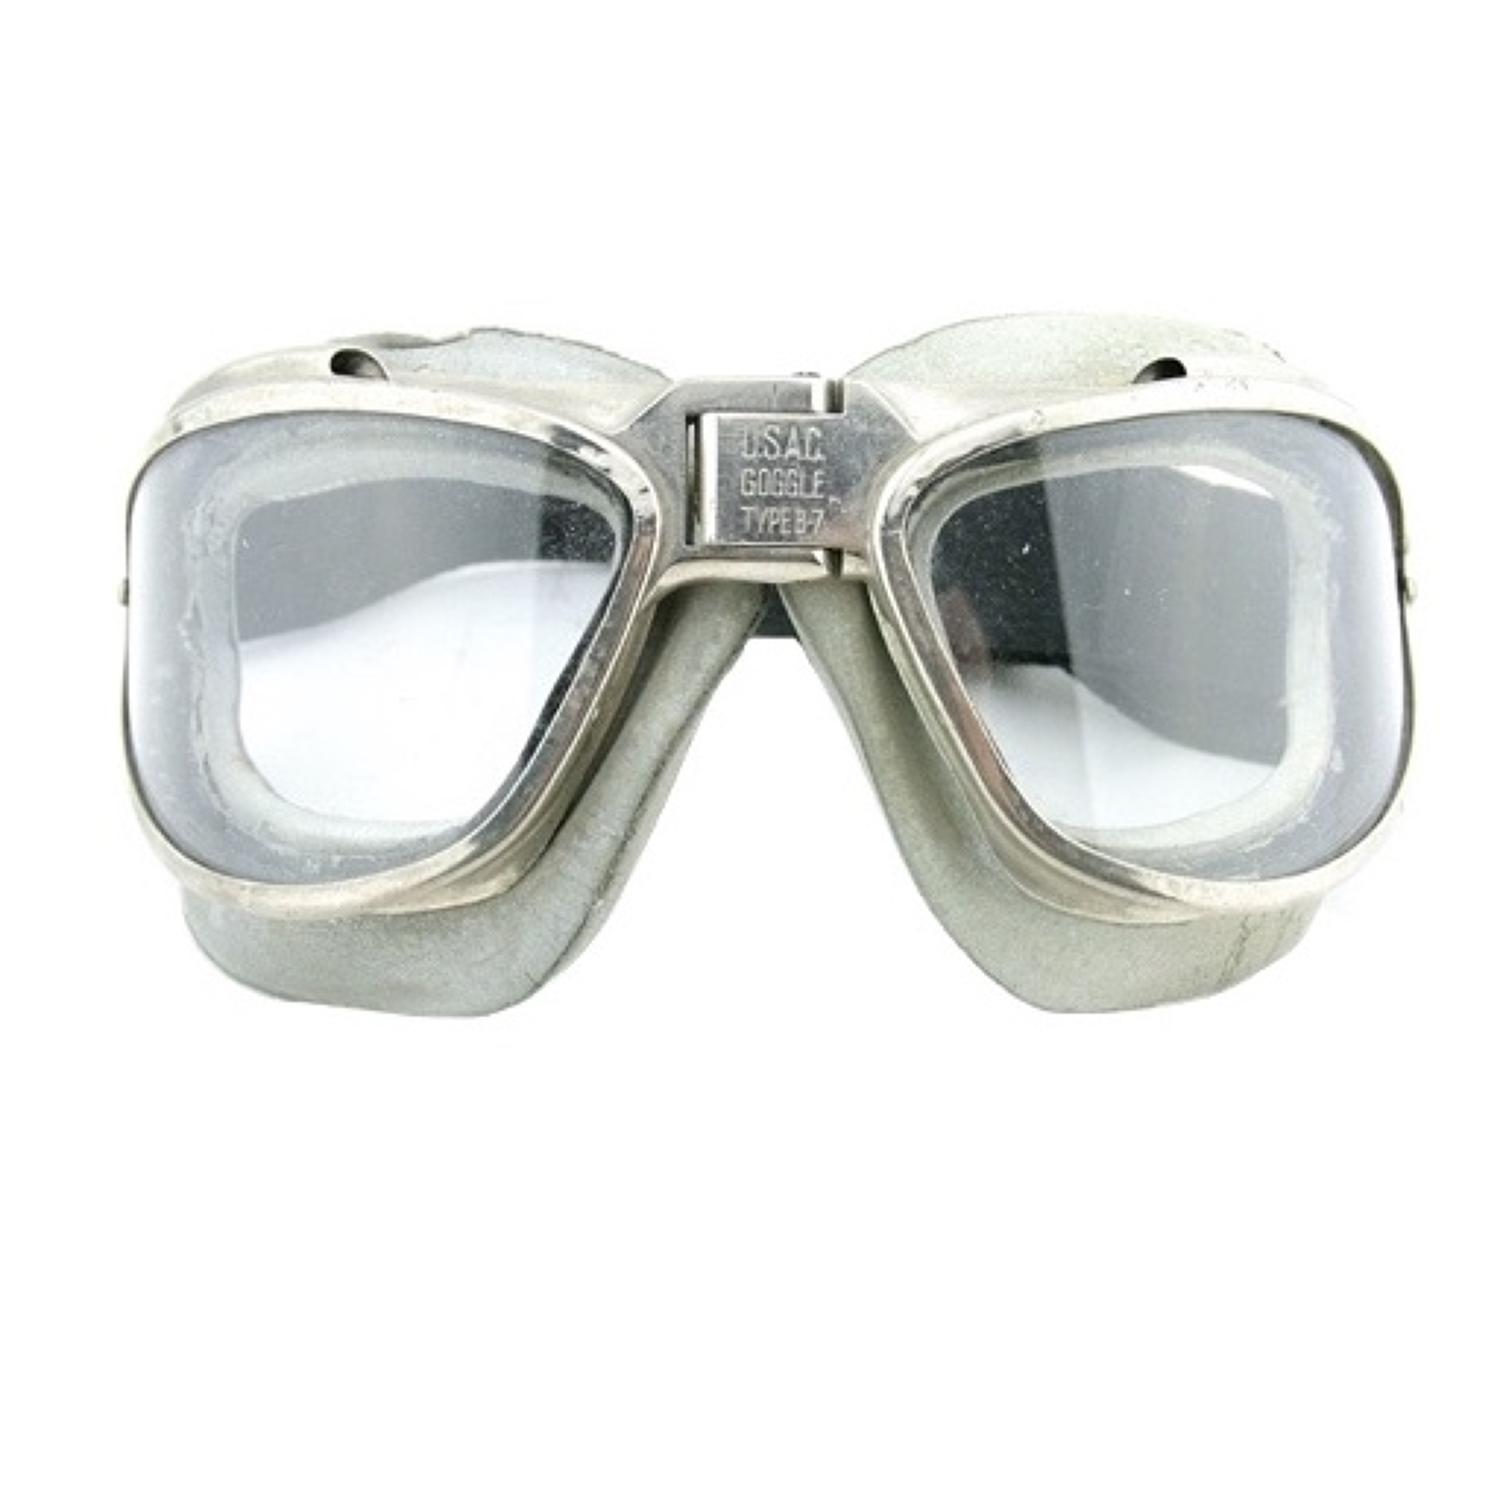 USAC type B-7 flying goggles